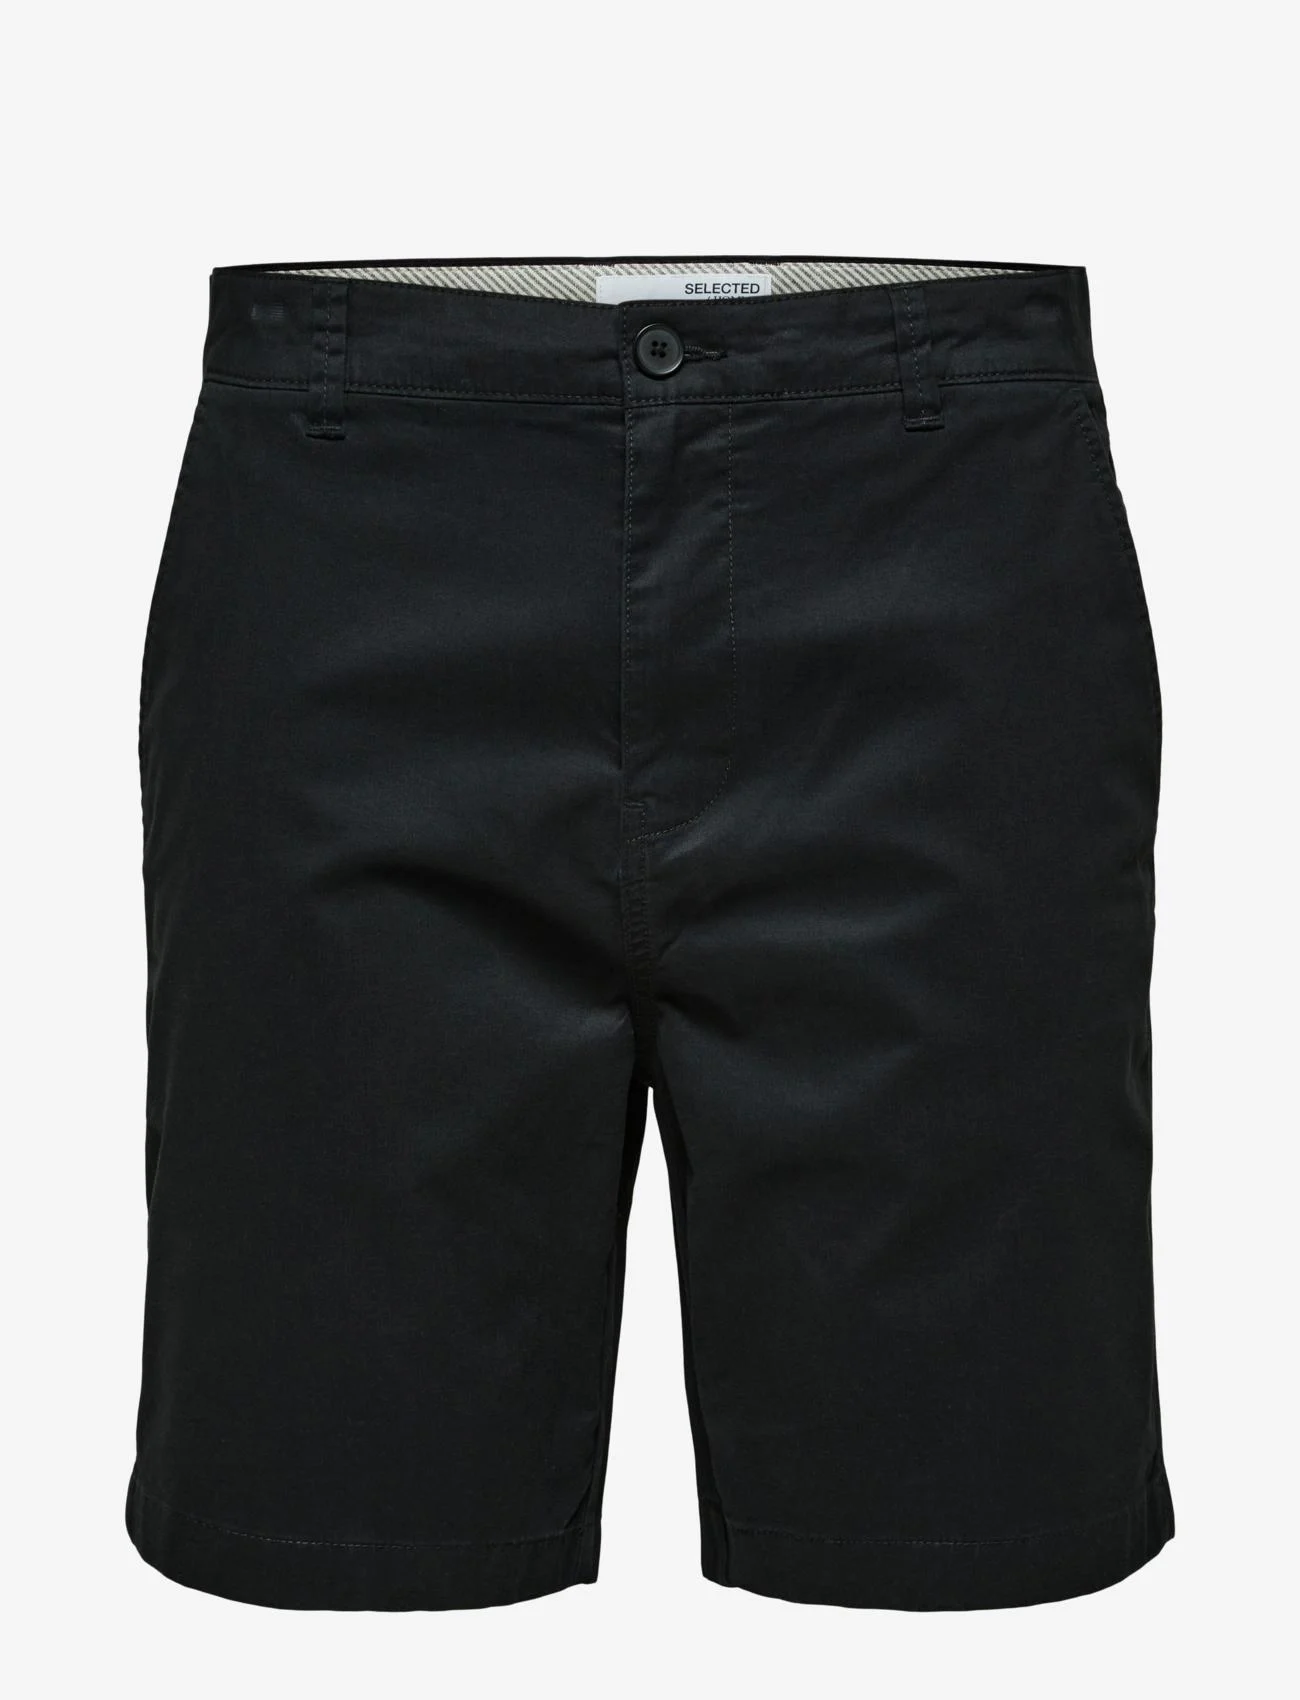 Selected Homme - SLHCOMFORT-HOMME FLEX SHORTS W NOOS - lowest prices - black - 0